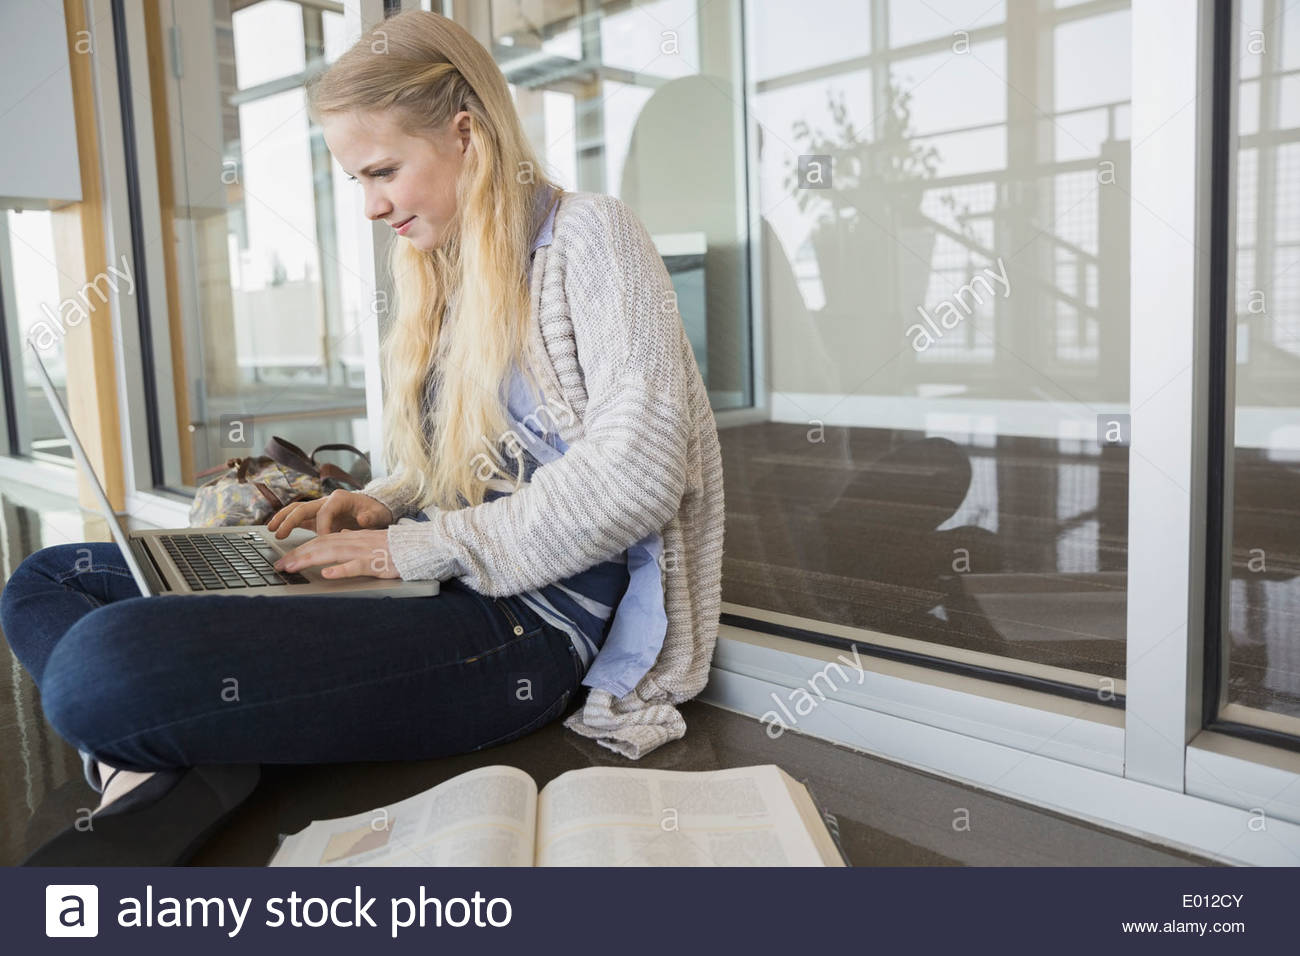 High school student using laptop on floor Banque D'Images